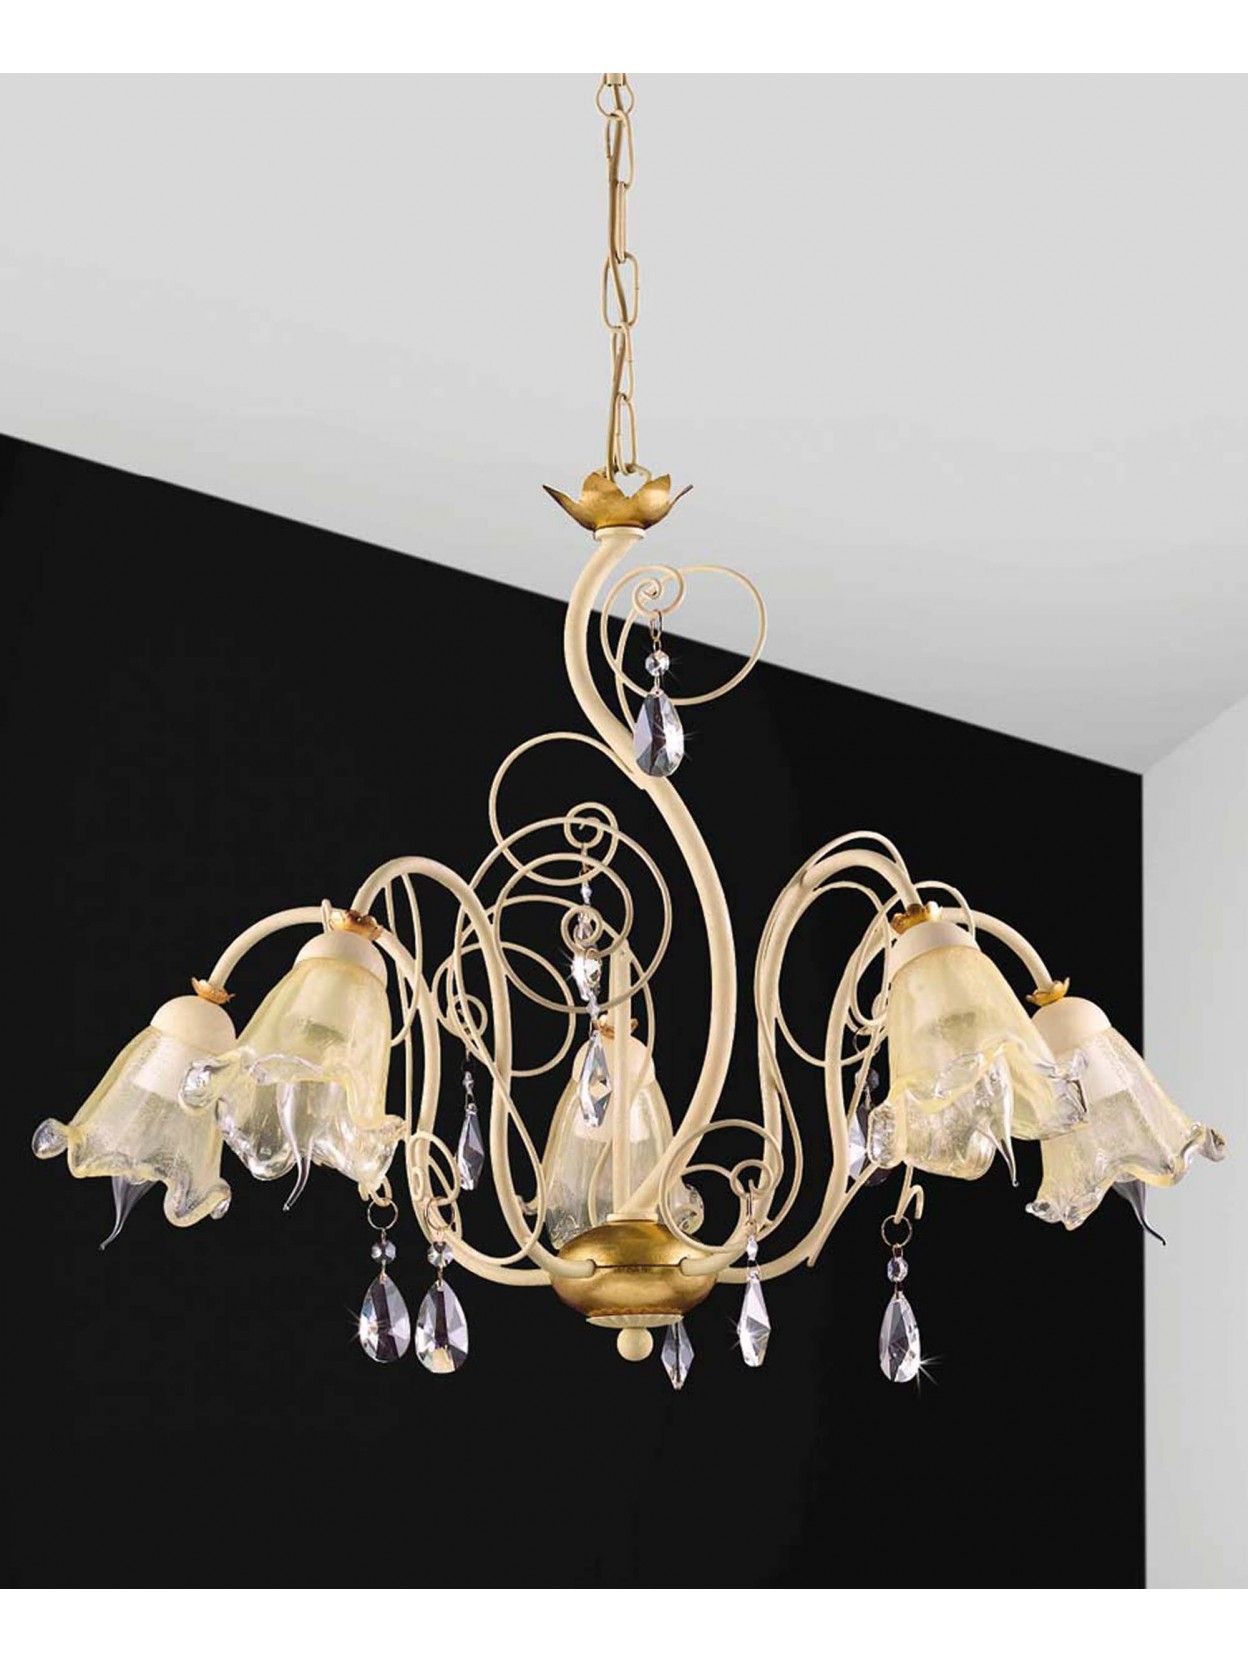 Chandelier 5 Lights Wrought Iron Cream And Gold Leaf Pre 156/5 Inside Cream And Rusty Lantern Chandeliers (Photo 6 of 15)